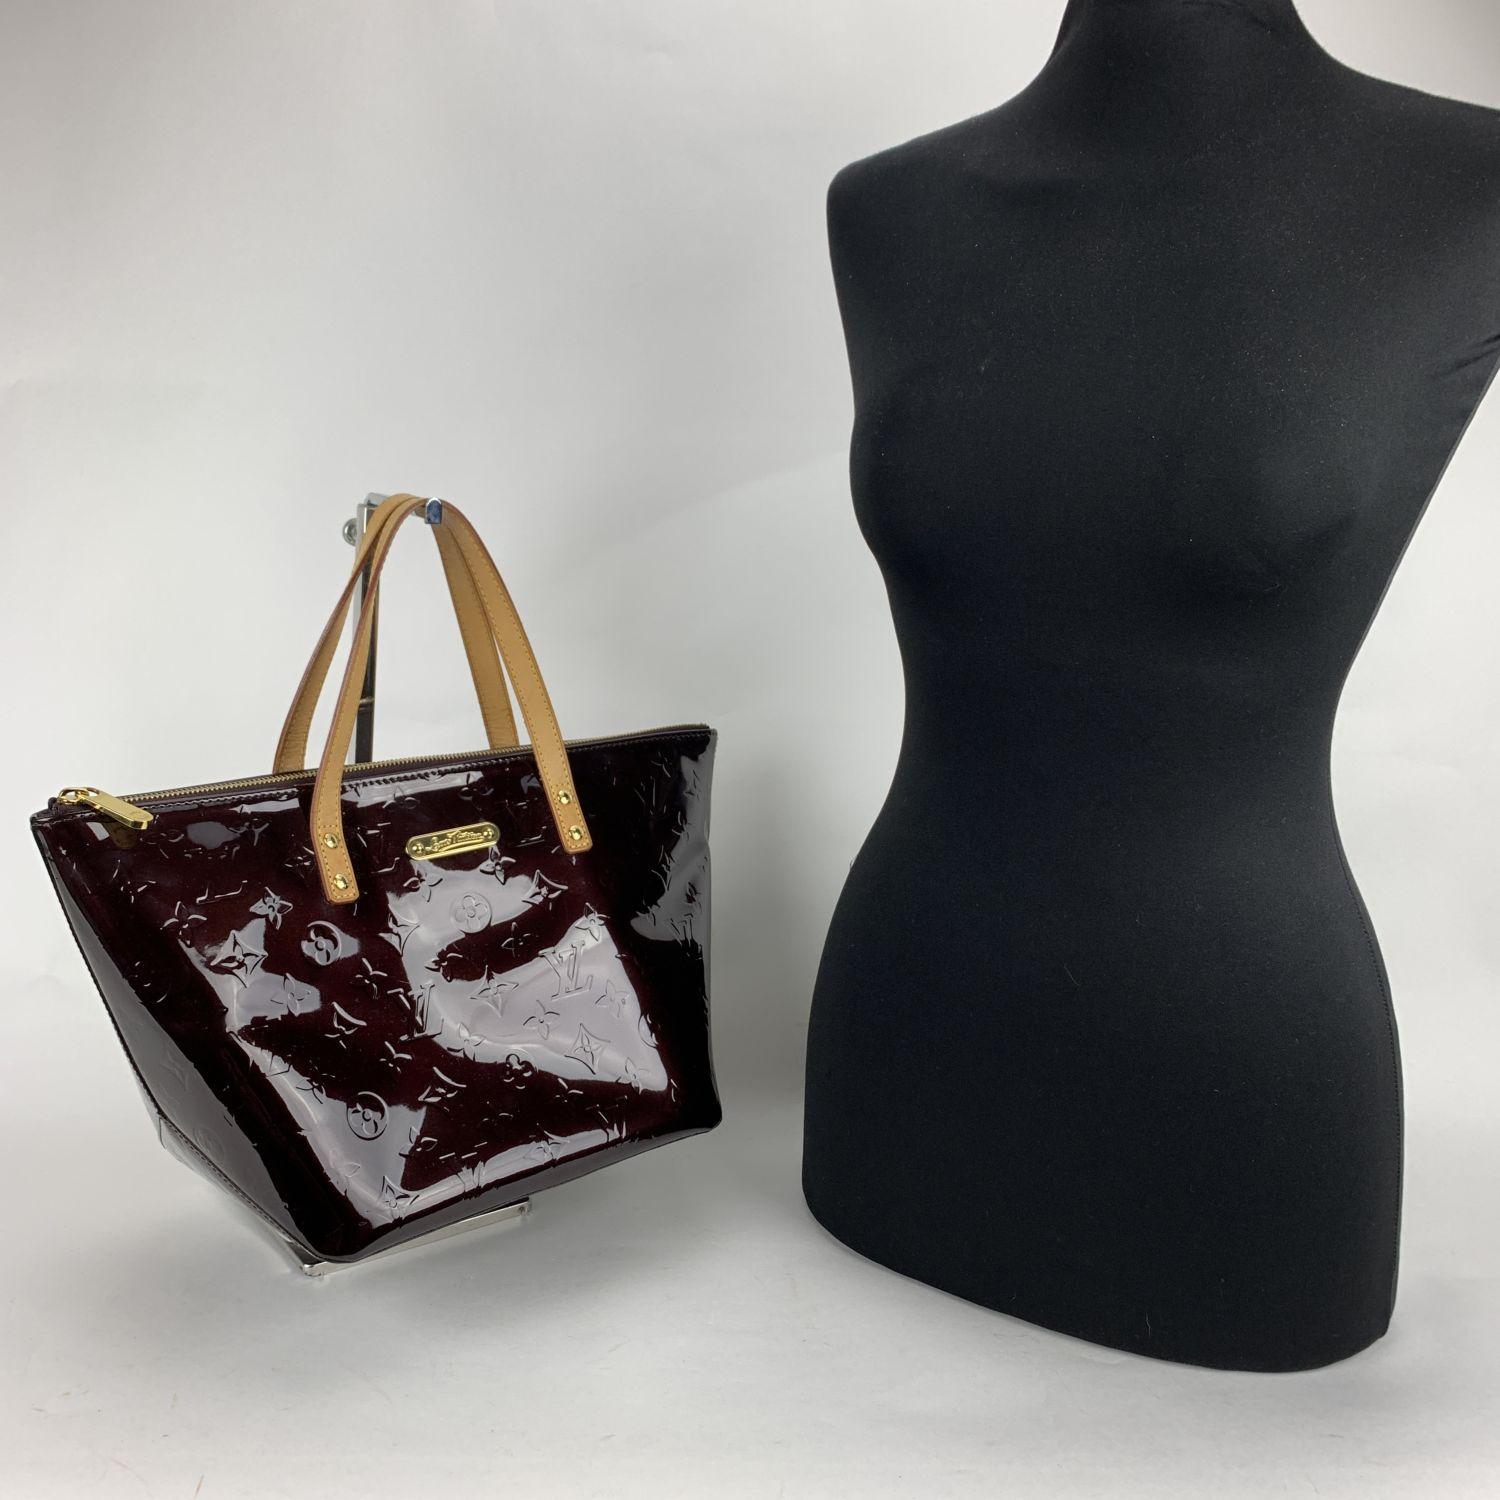 Sophisticated 'Bellevue PM' Tote Bag by LOUIS VUITTON, crafted in amarante Monogram Vernis leather. The bag features a large main compartment with upper zipper closure. Purple fabric internal lining with 1 side open pocket inside. 'LOUIS VUITTON